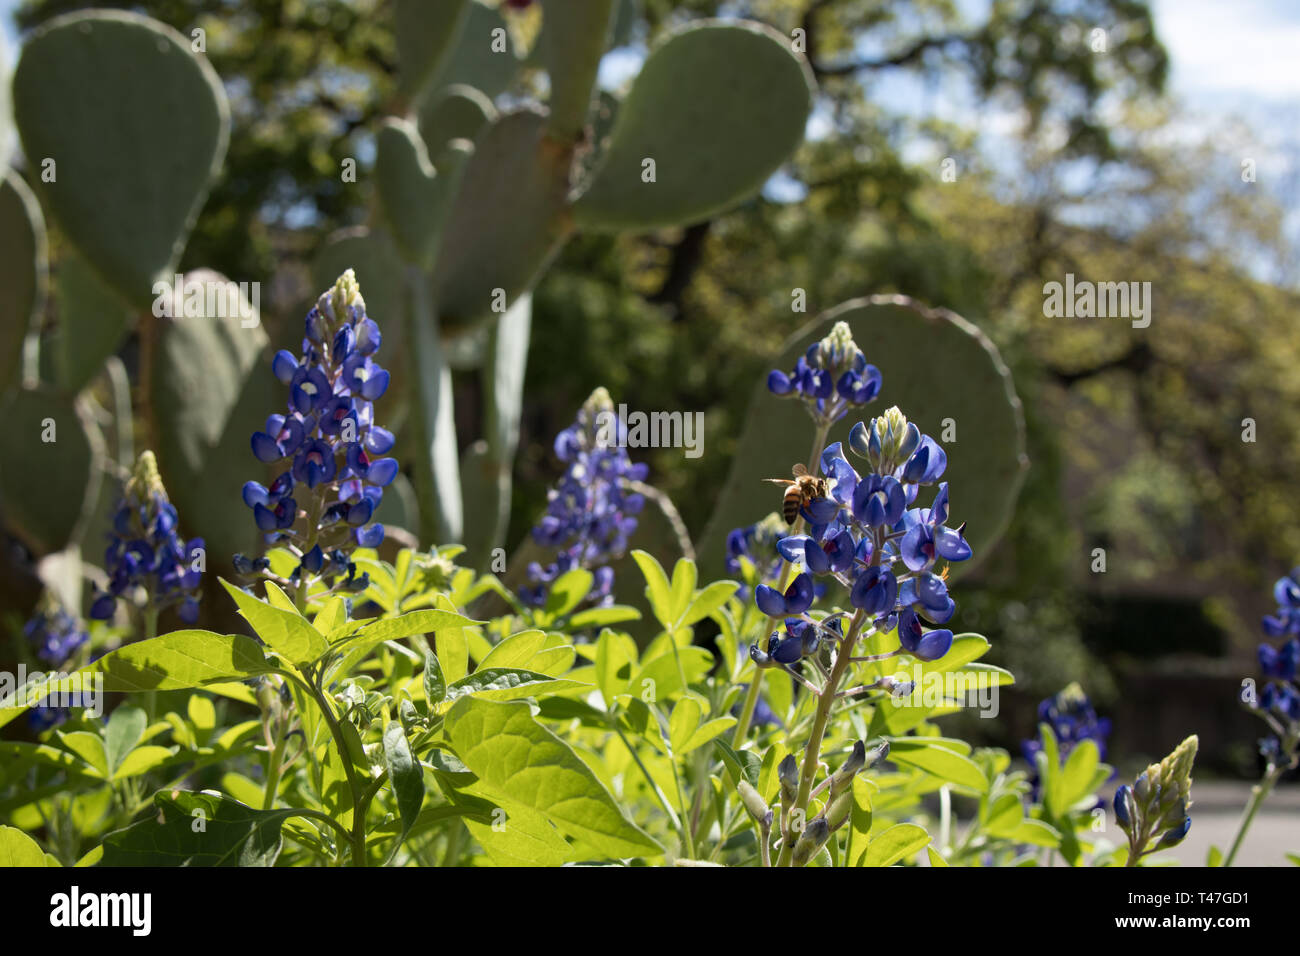 Texas bluebonnets and prickly pear cactus Stock Photo